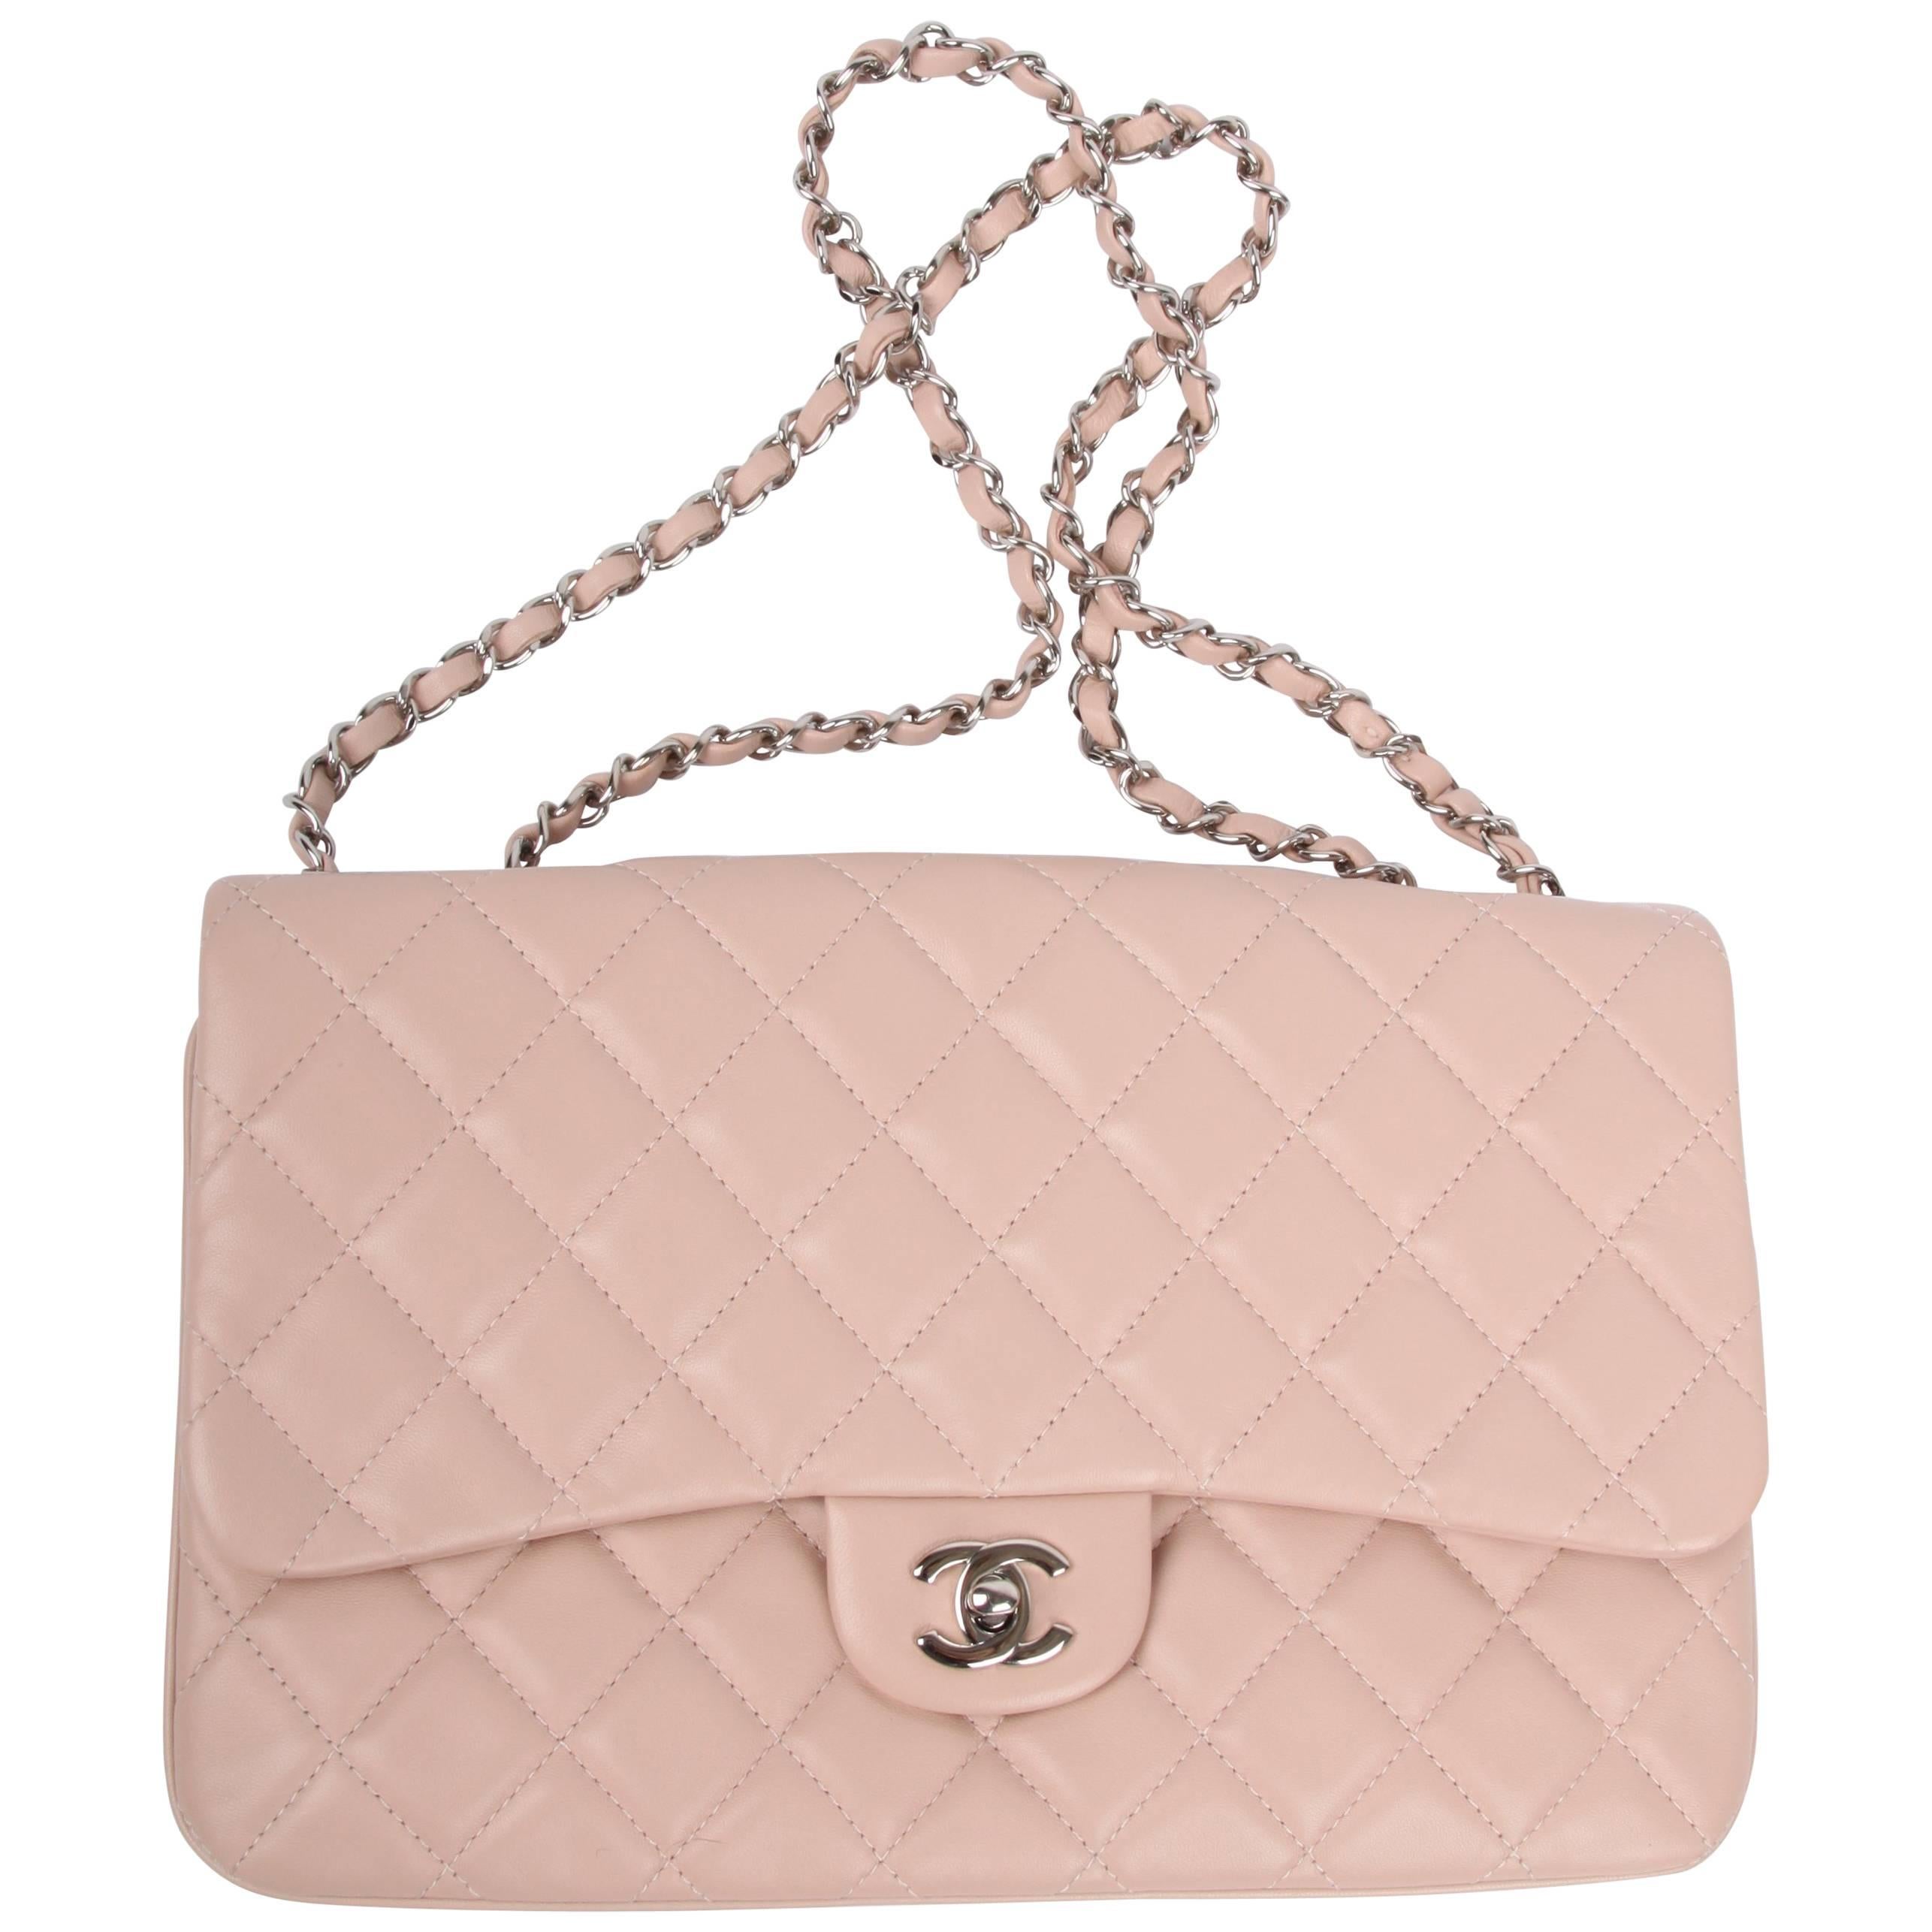 Chanel Classic Flap Bag Jumbo 3 - dusty pink For Sale